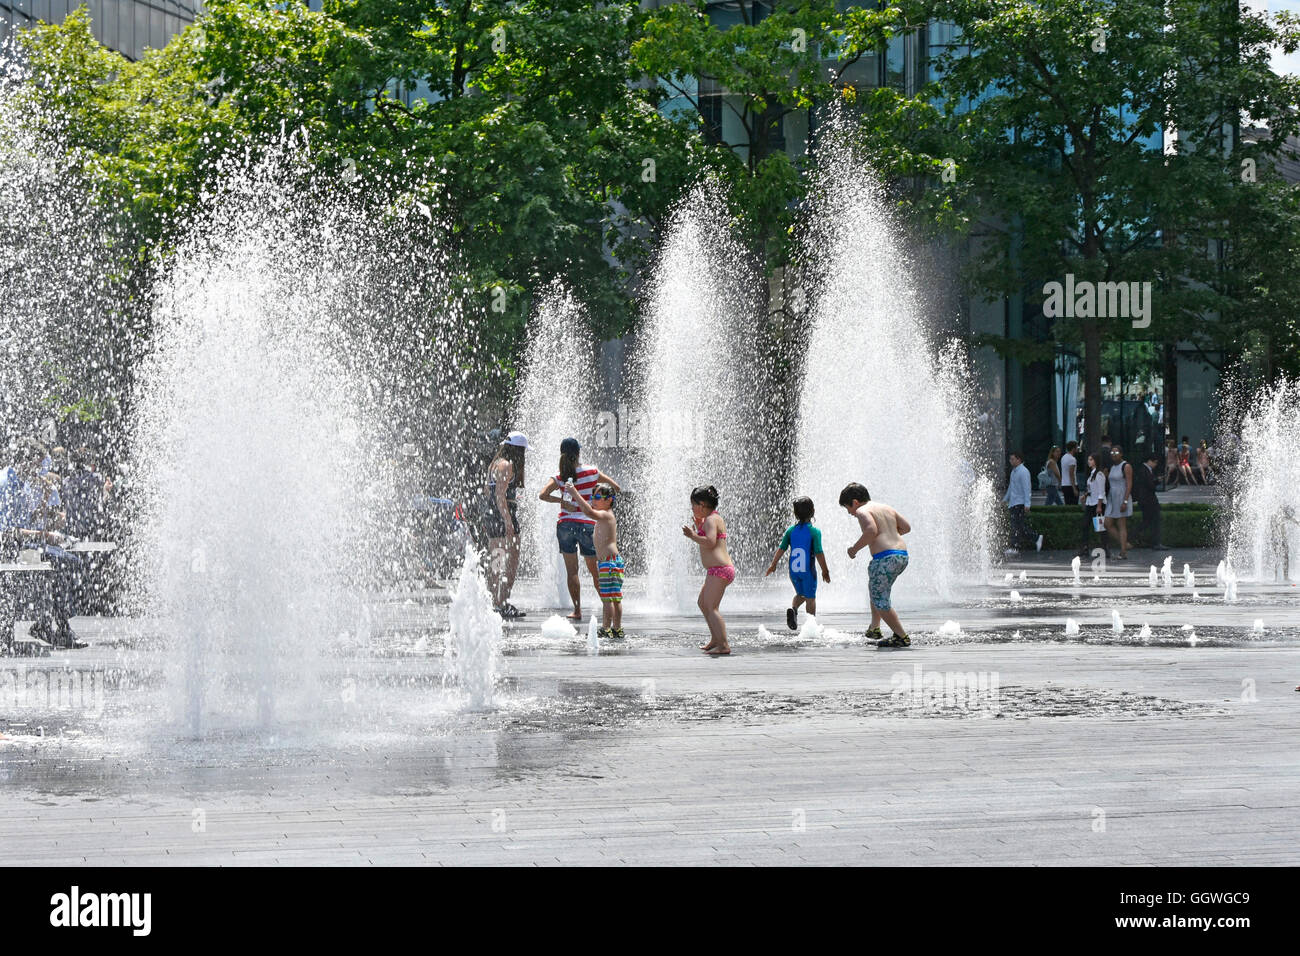 children-playing-in-variable-height-water-fountain-jets-at-random-GGWGC9.jpg